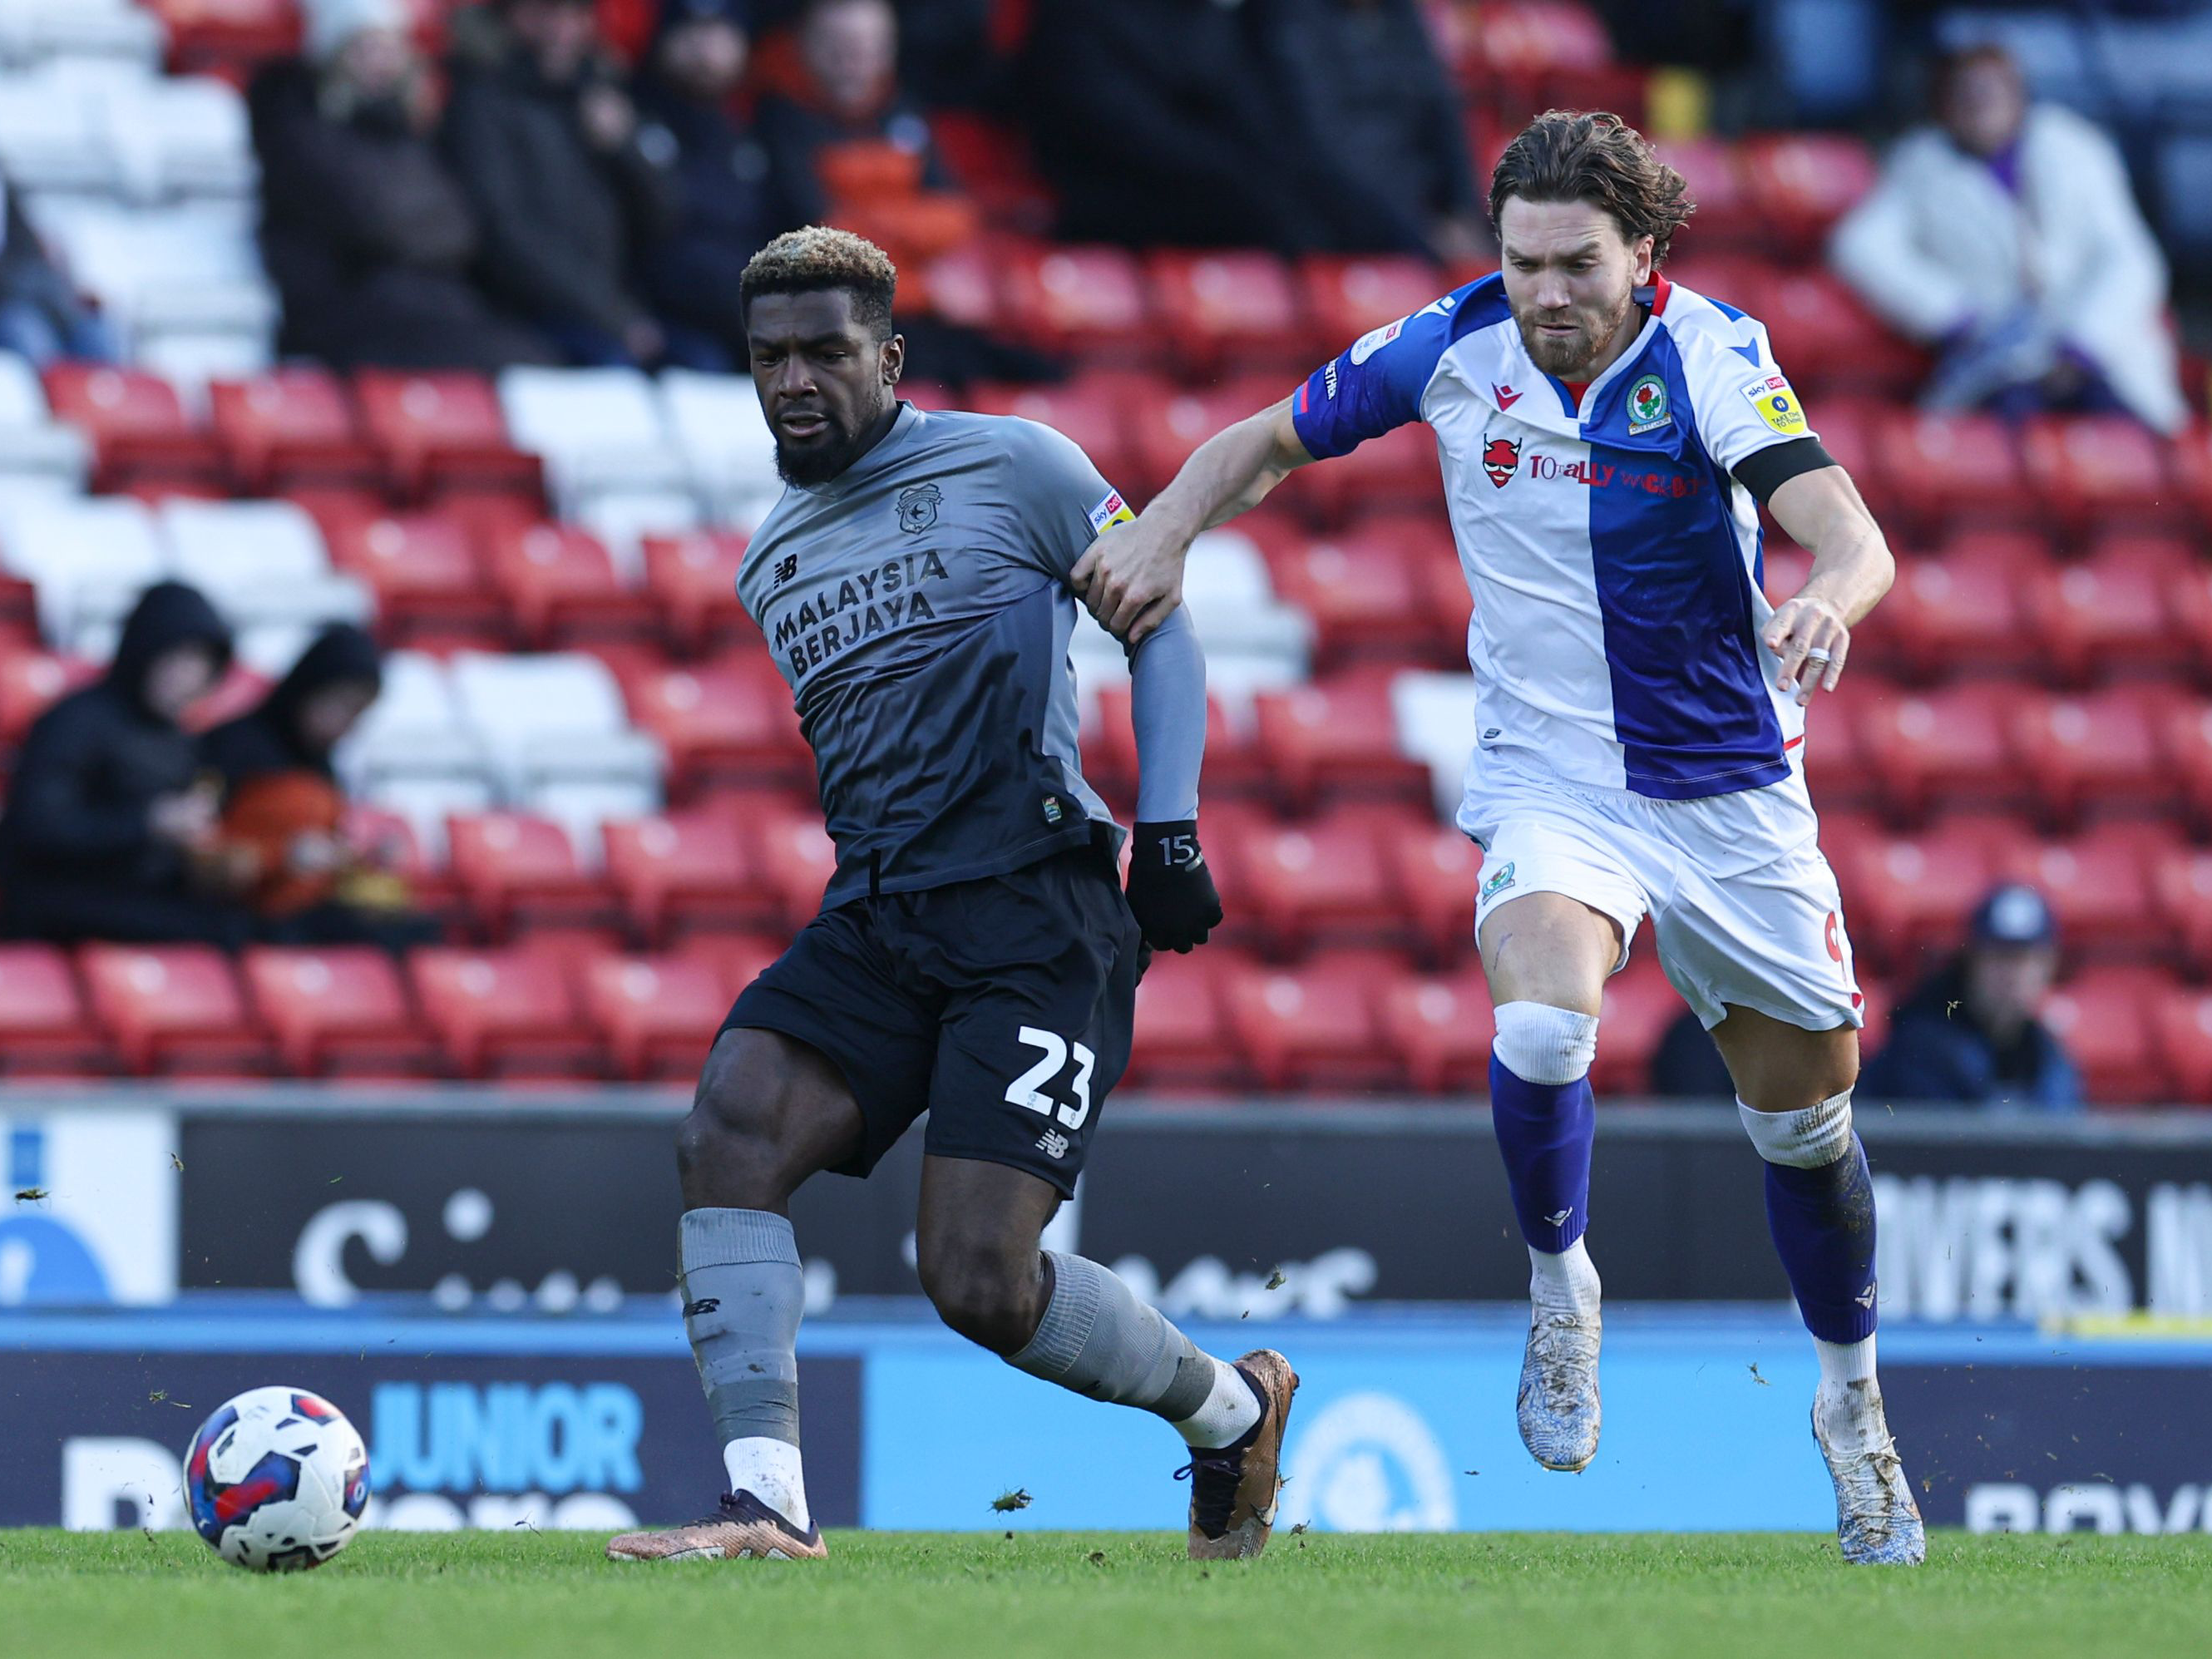 Cedric Kipre battles for the ball with Bradley Dack of Blackburn during his loan side Cardiff City's clash with Rovers at Ewood Park